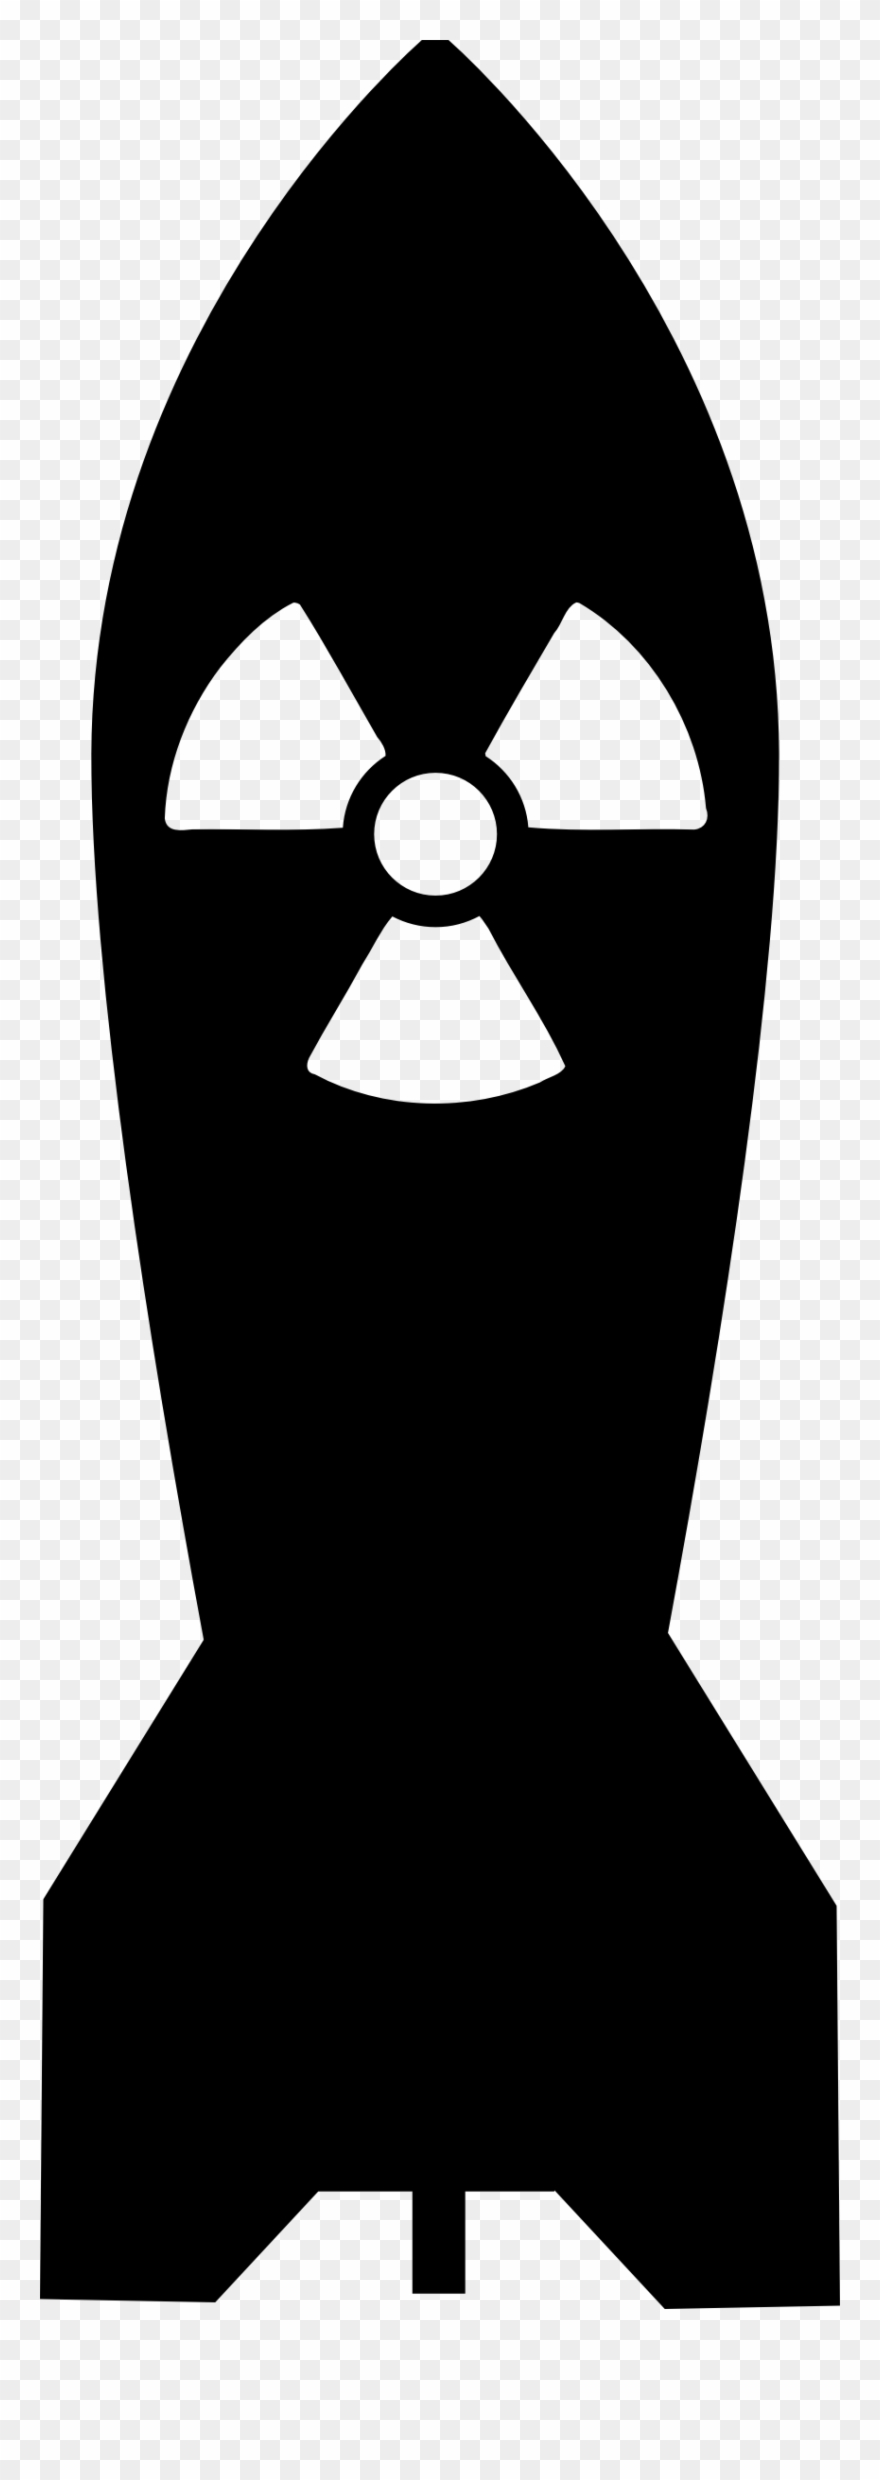 Png Stock Bomb Clipart Black And White